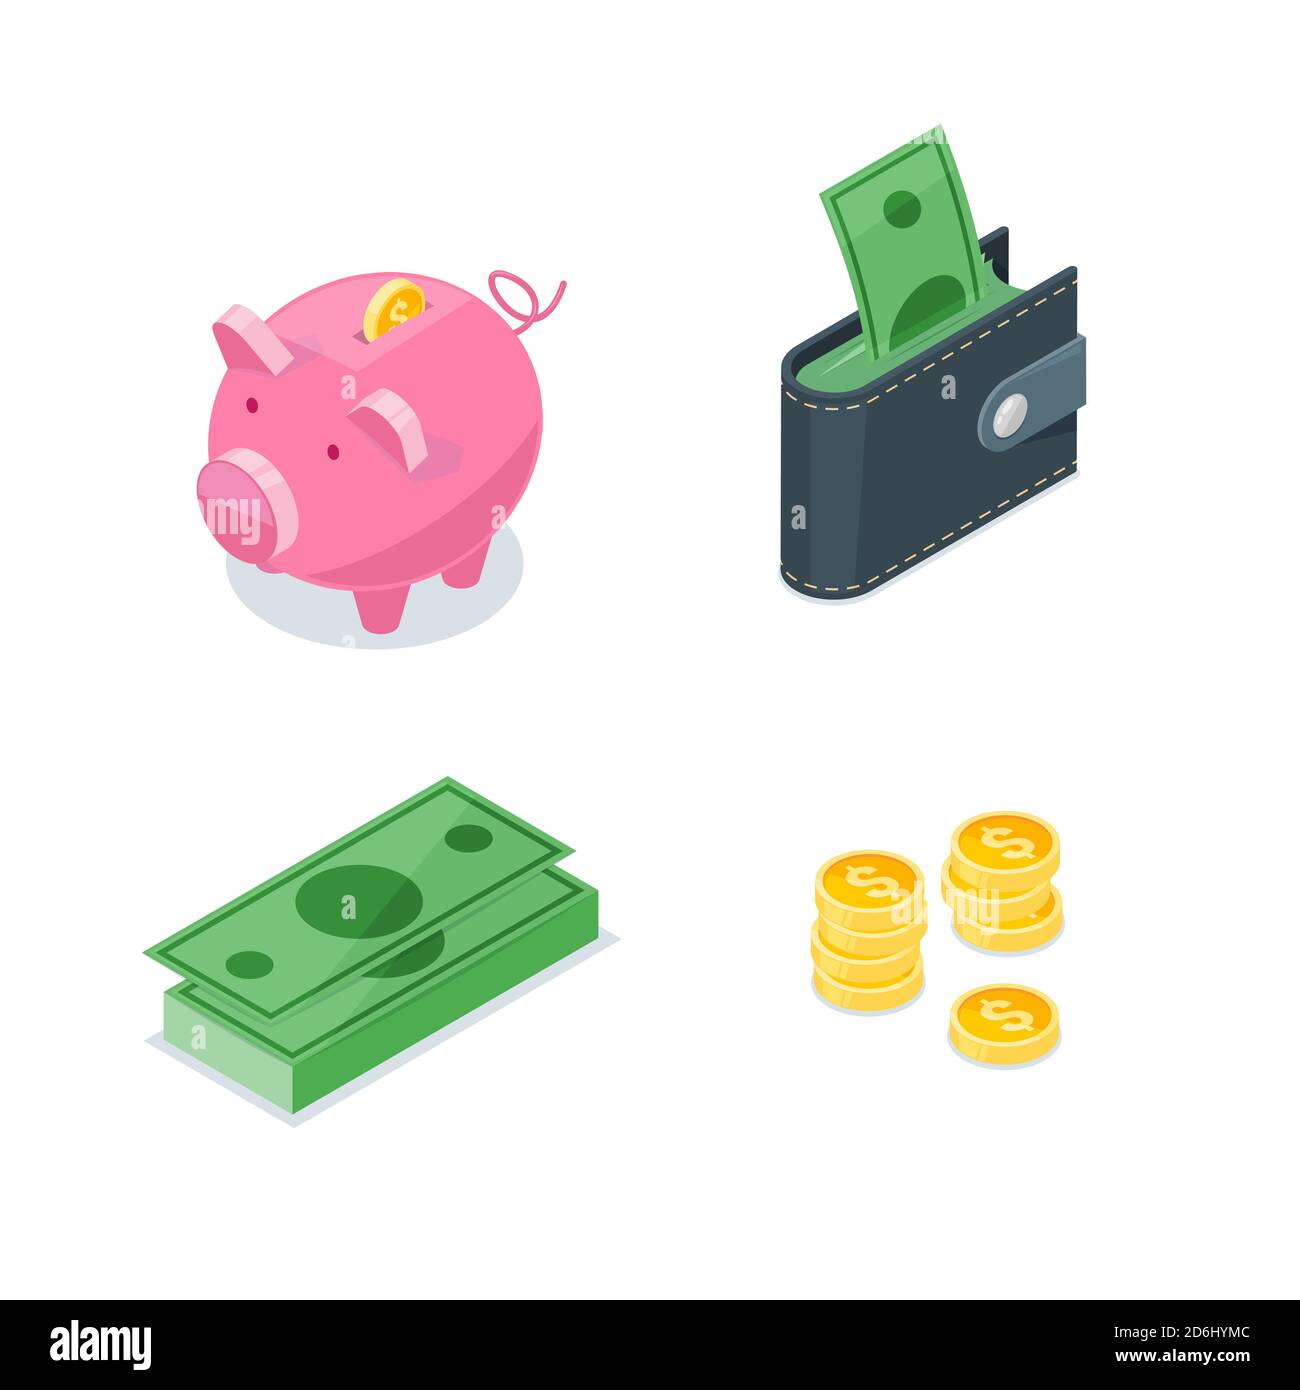 Money 3d isometric style vector icons set. Isolated finance, banking, investment and commerce symbol. Coins, dollars, piggy bank and wallet illustrati Stock Vector